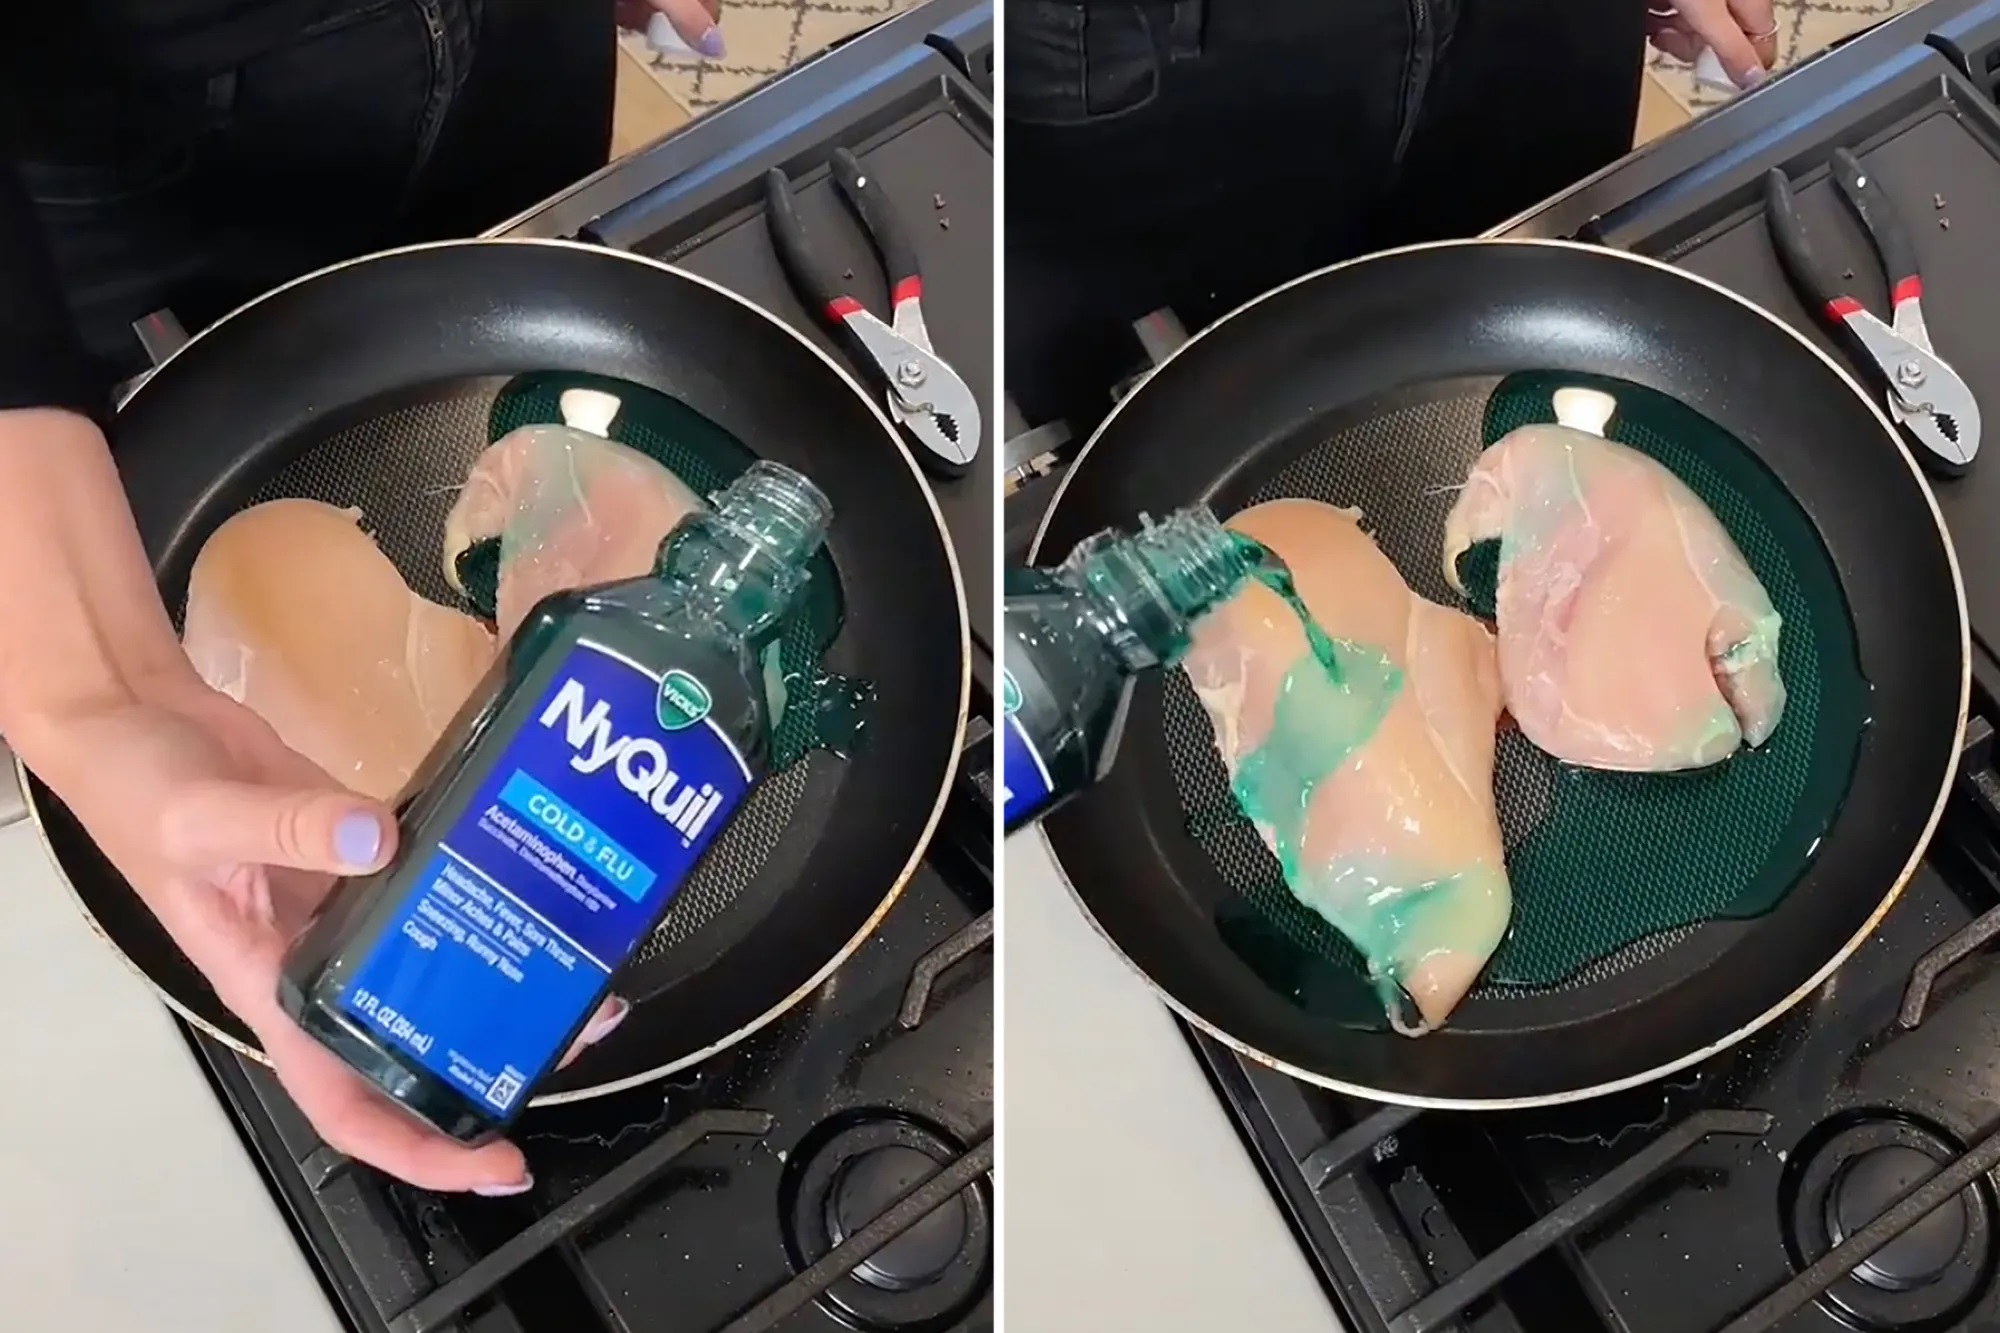 The FDA Issues Warning Against The Viral TikTok Cooking Chicken In NyQuil Challenge